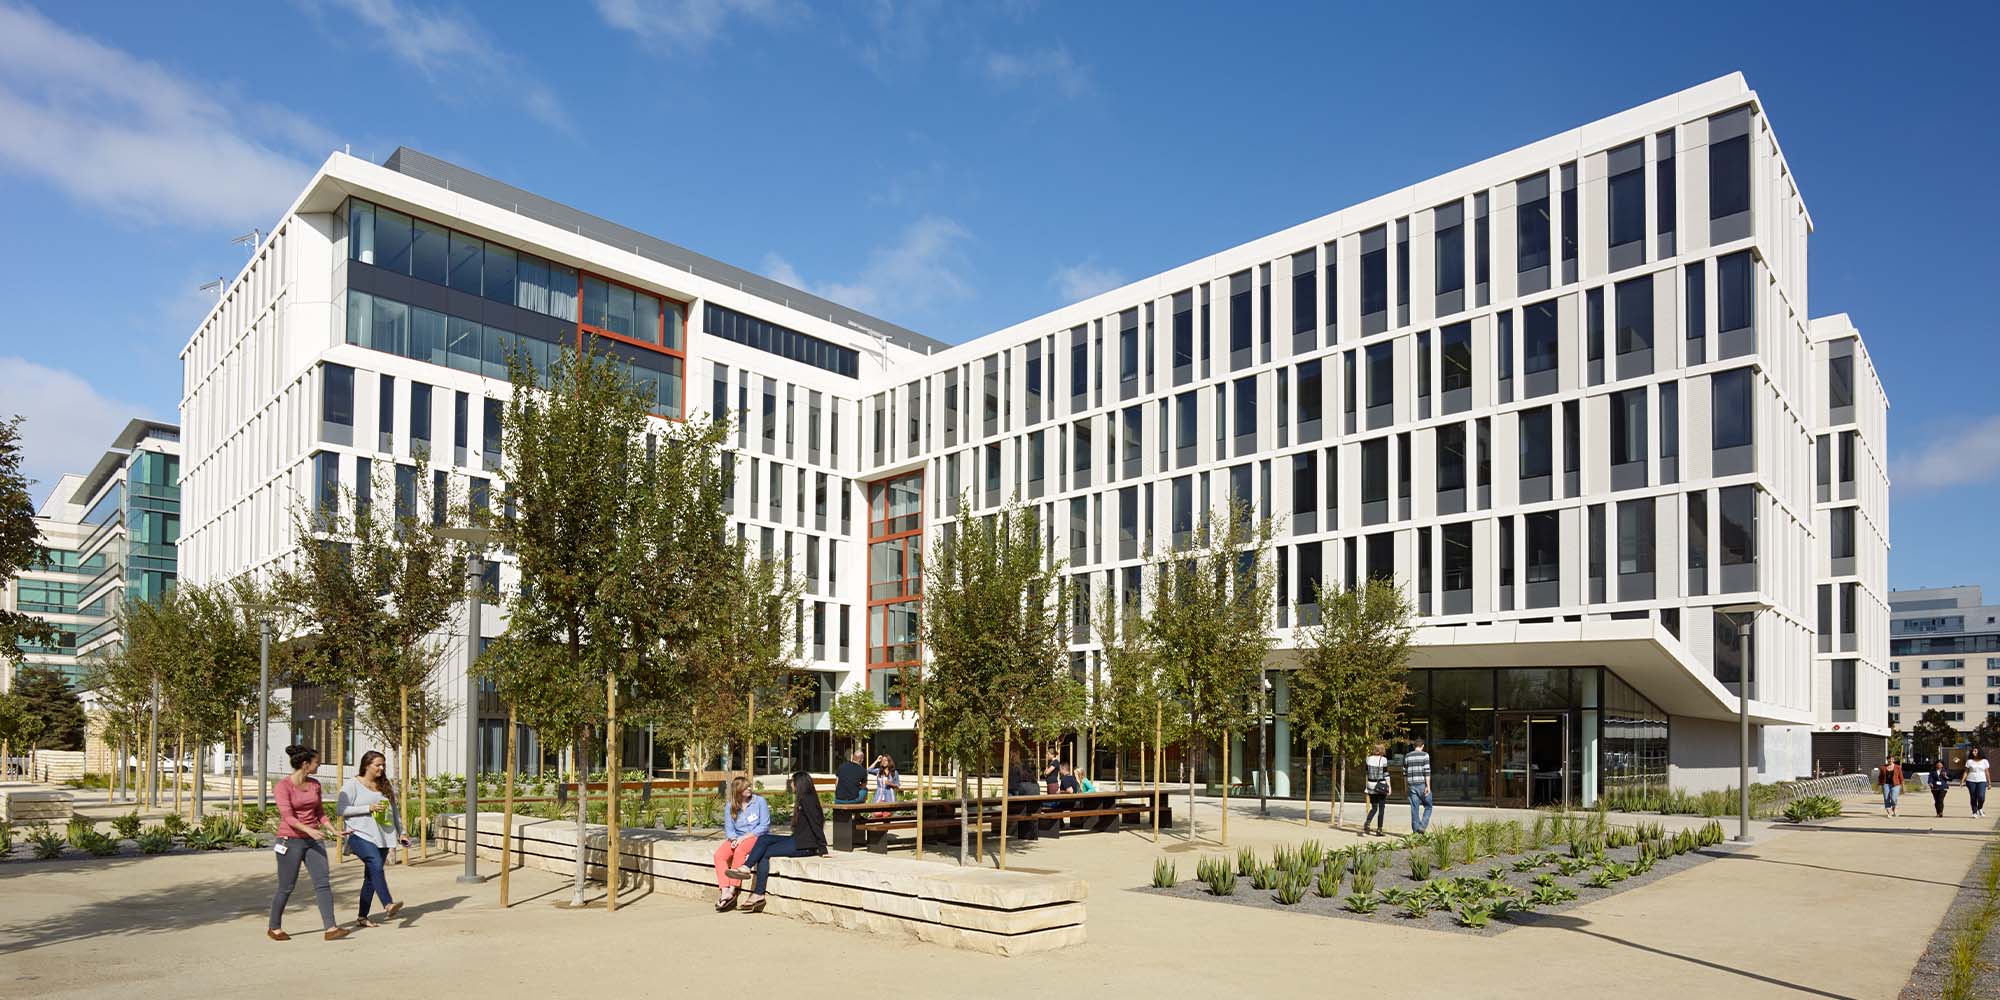 Tutor Perini Subsidiary Rudolph and Sletten Awarded $94 Million Design-Build Contract for University of California, San Francisco Mission Bay Block 25A Academic Building